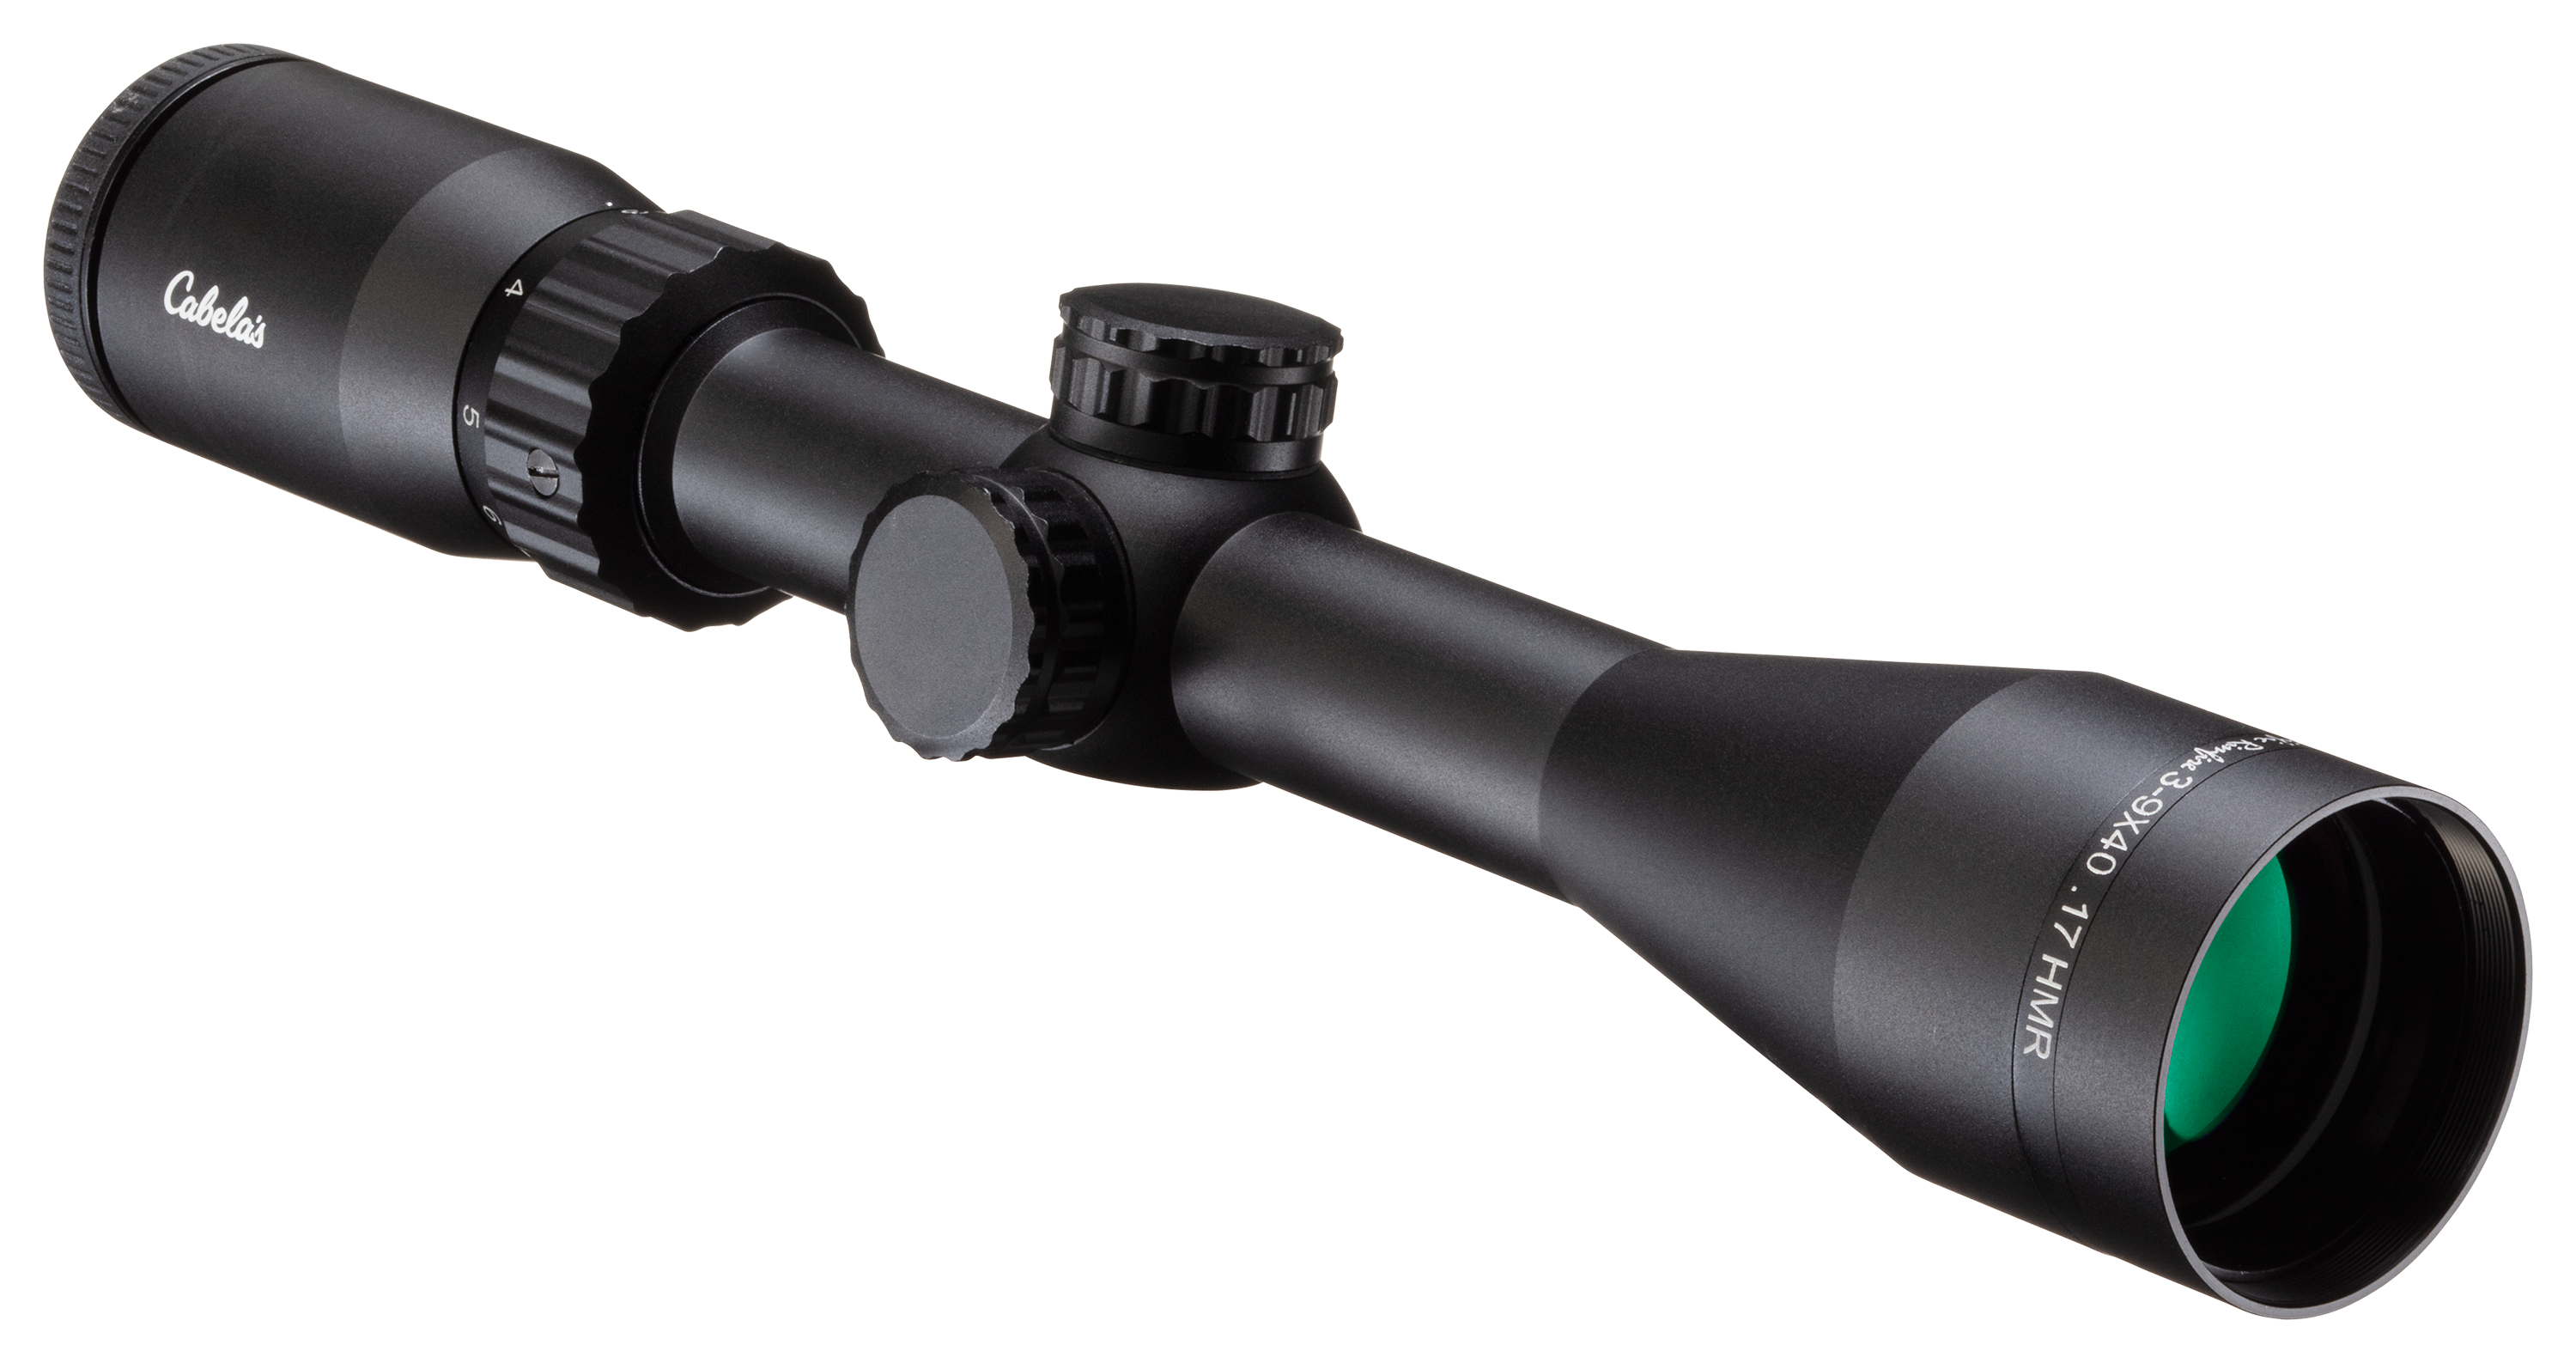 IV. Best Rifle Scopes for 22 Rimfire